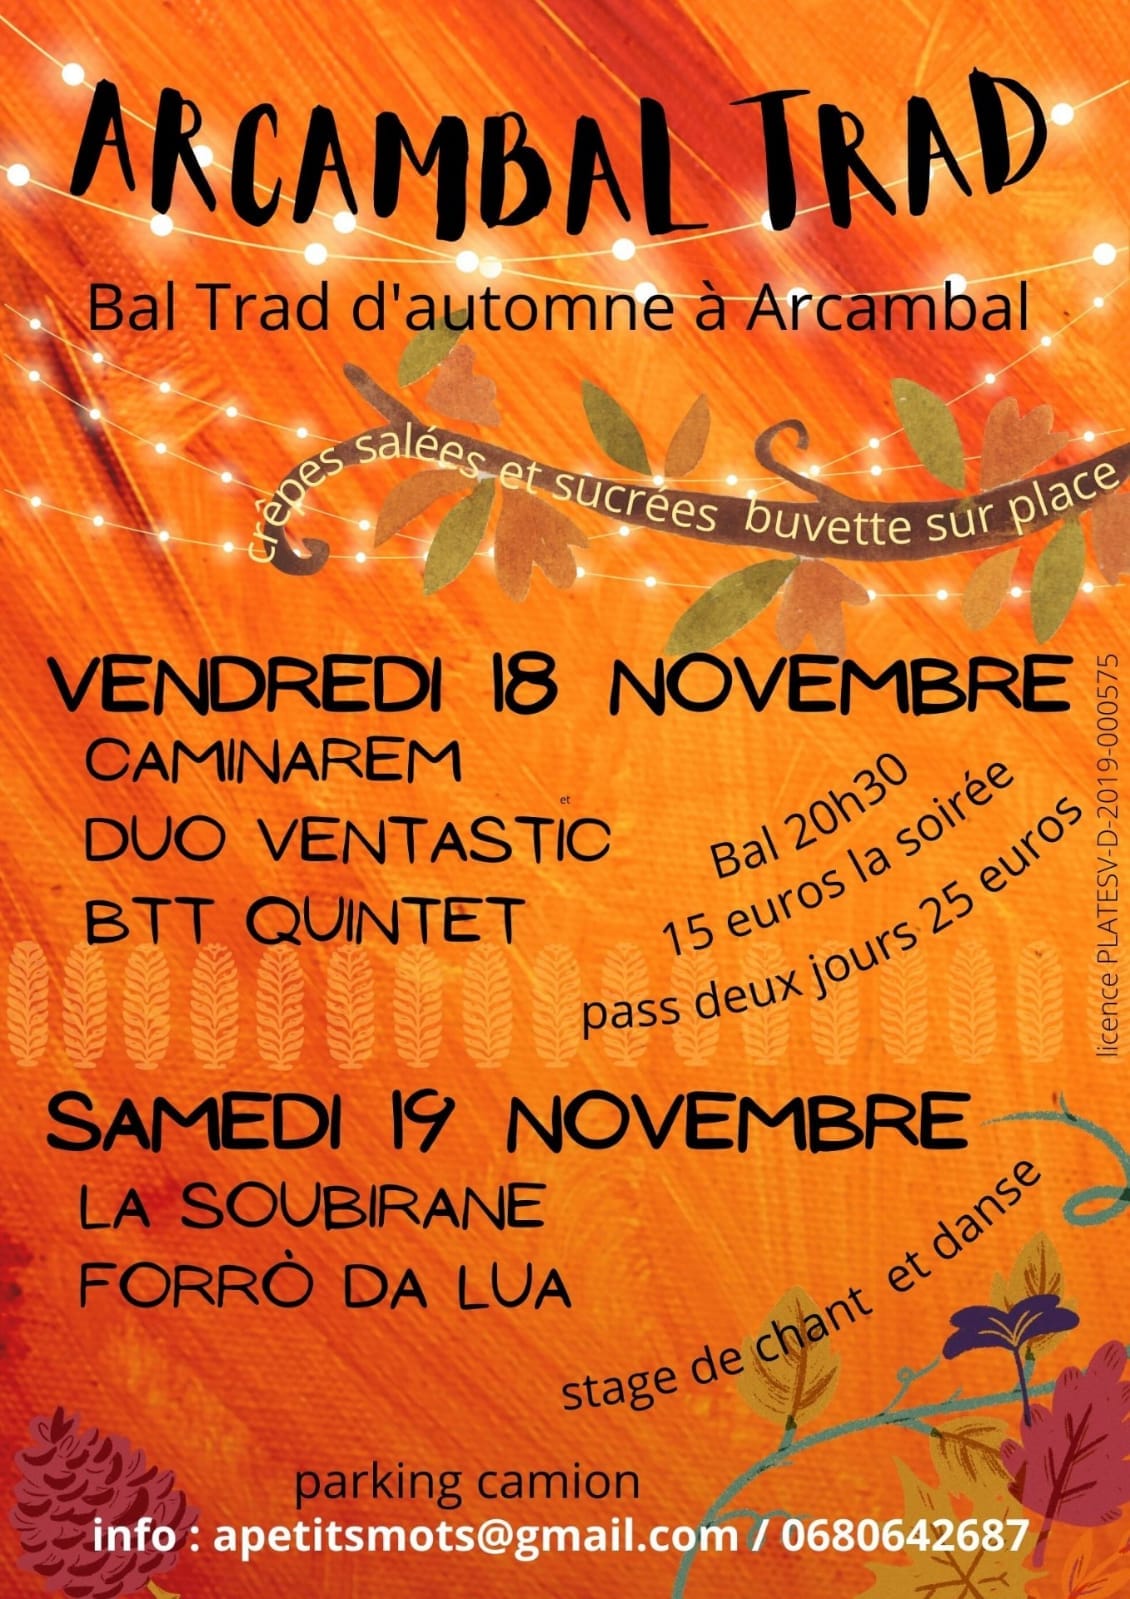 Figeac : Bal traditionnel d'automne